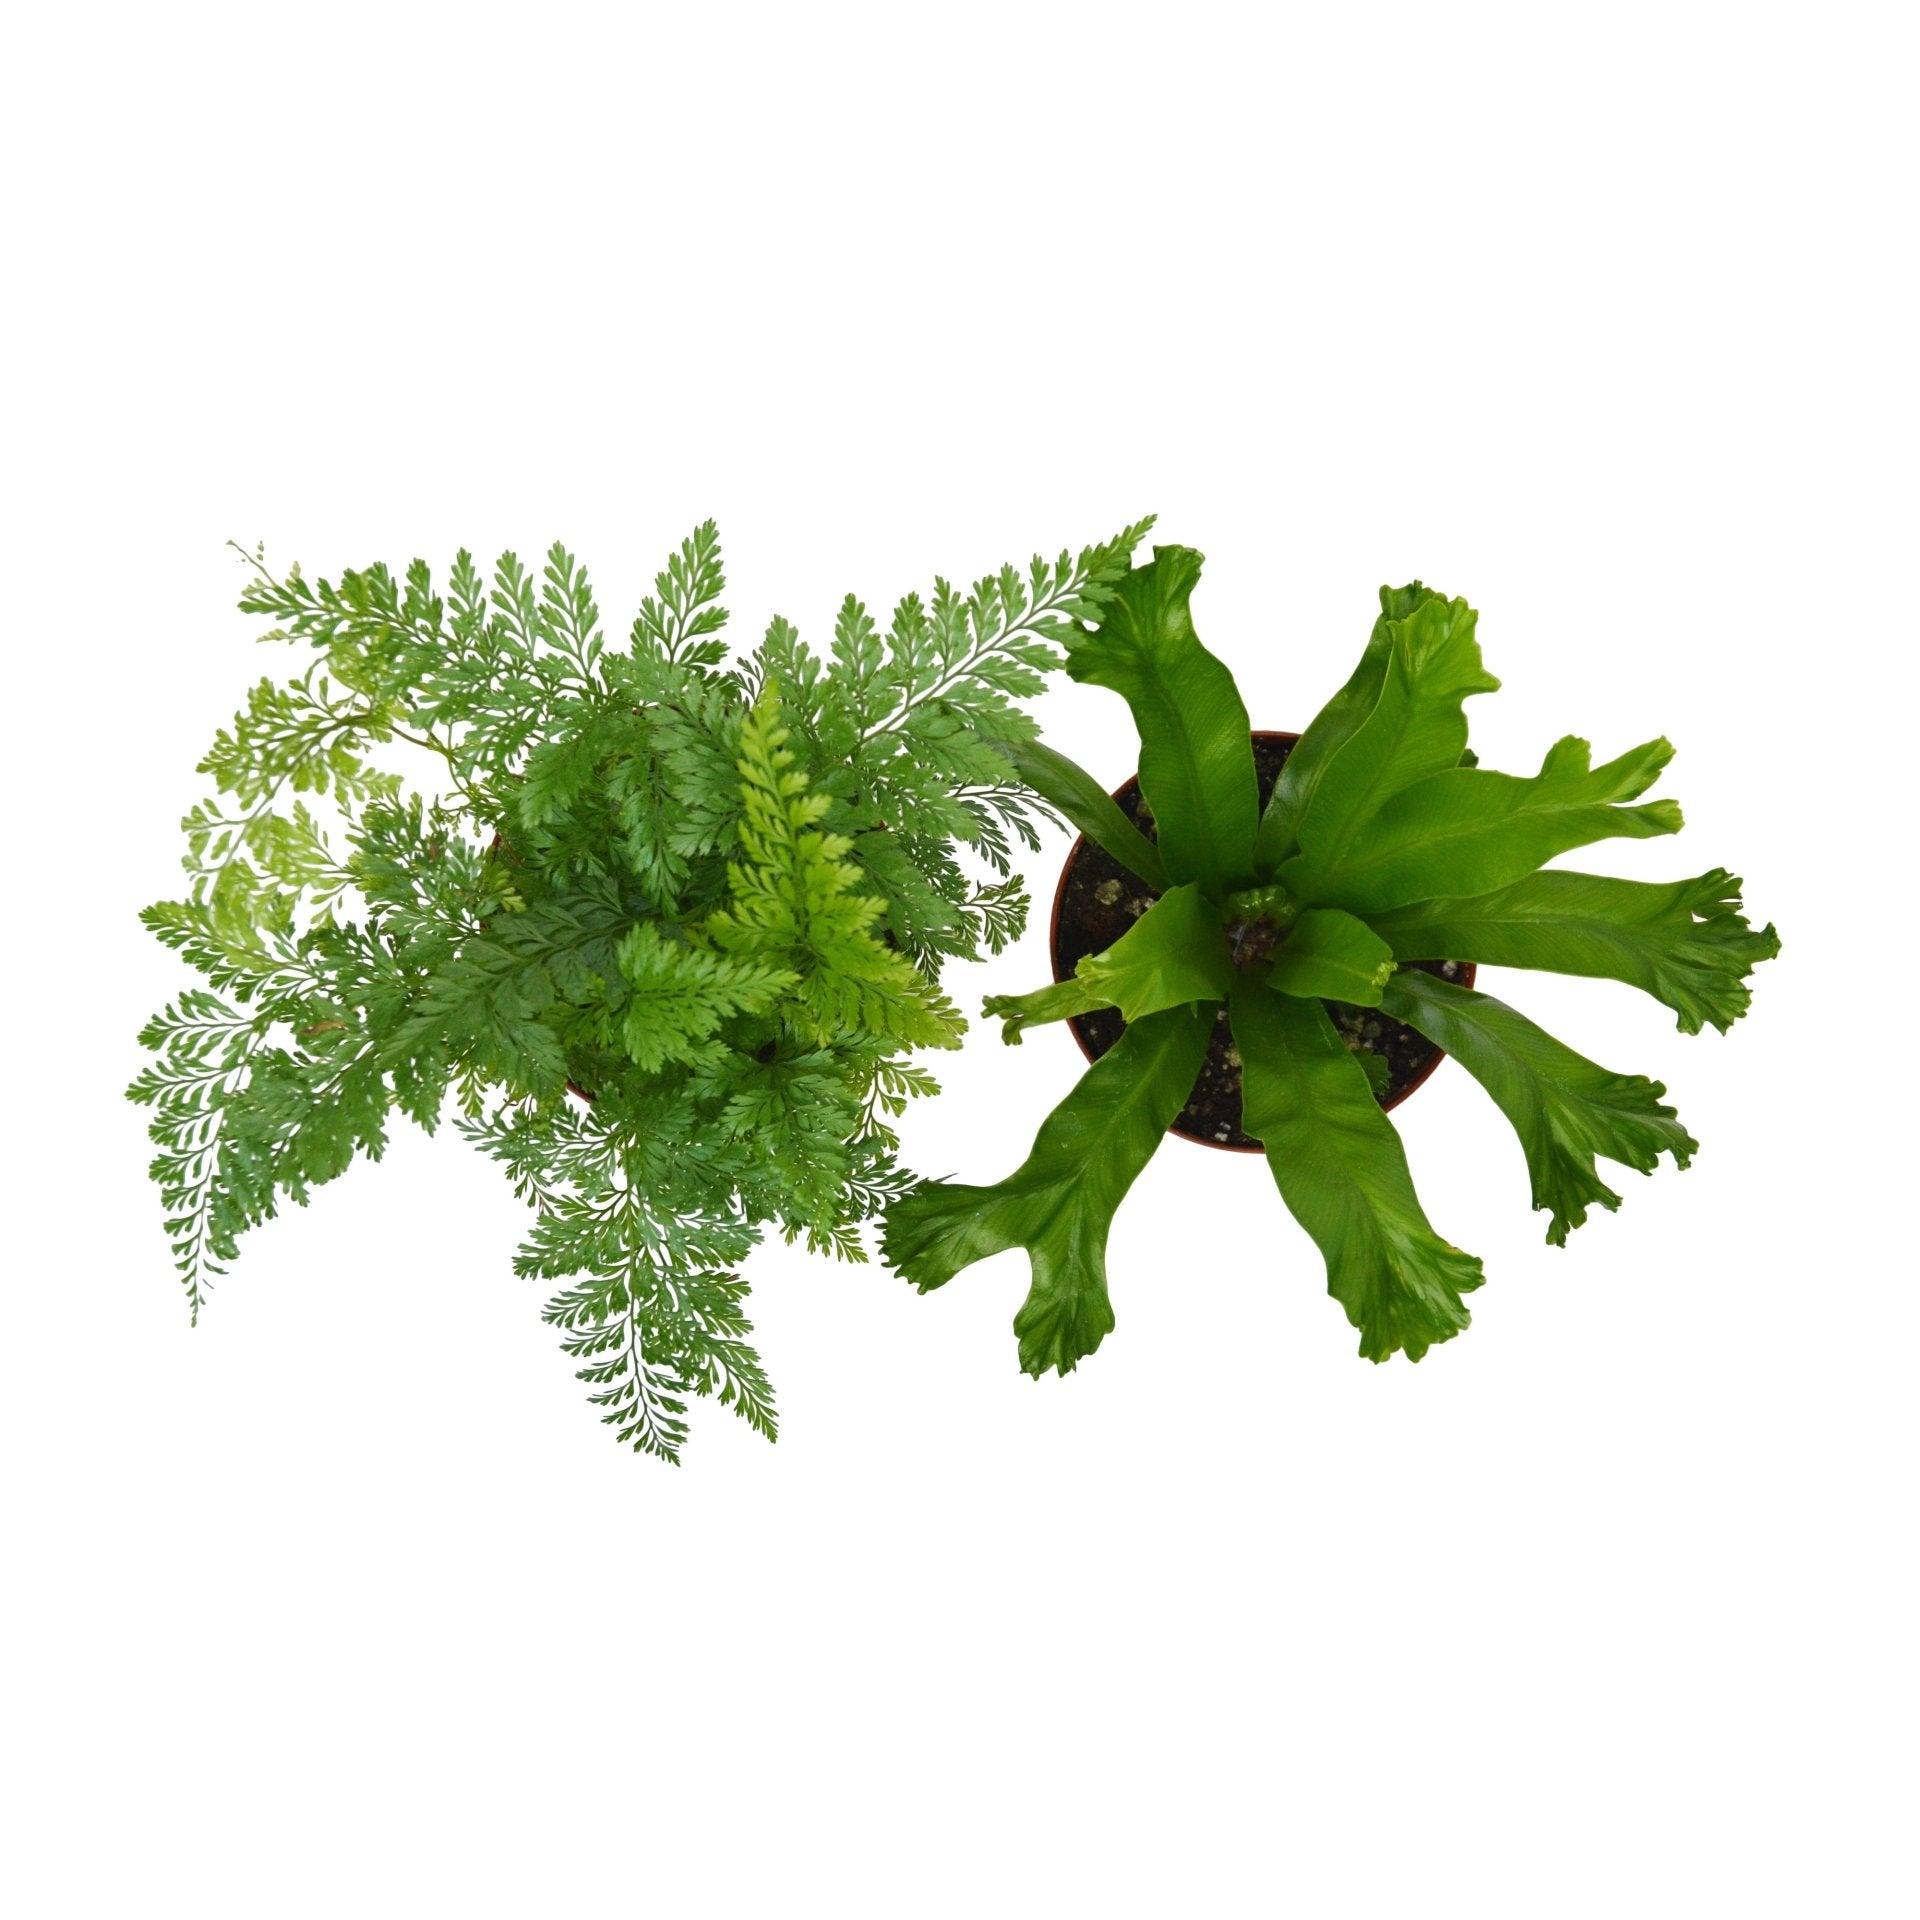 2 Fern Variety Pack - Live Plants - 4&quot; Pot - House Plant - Ethereal CompanyPlant